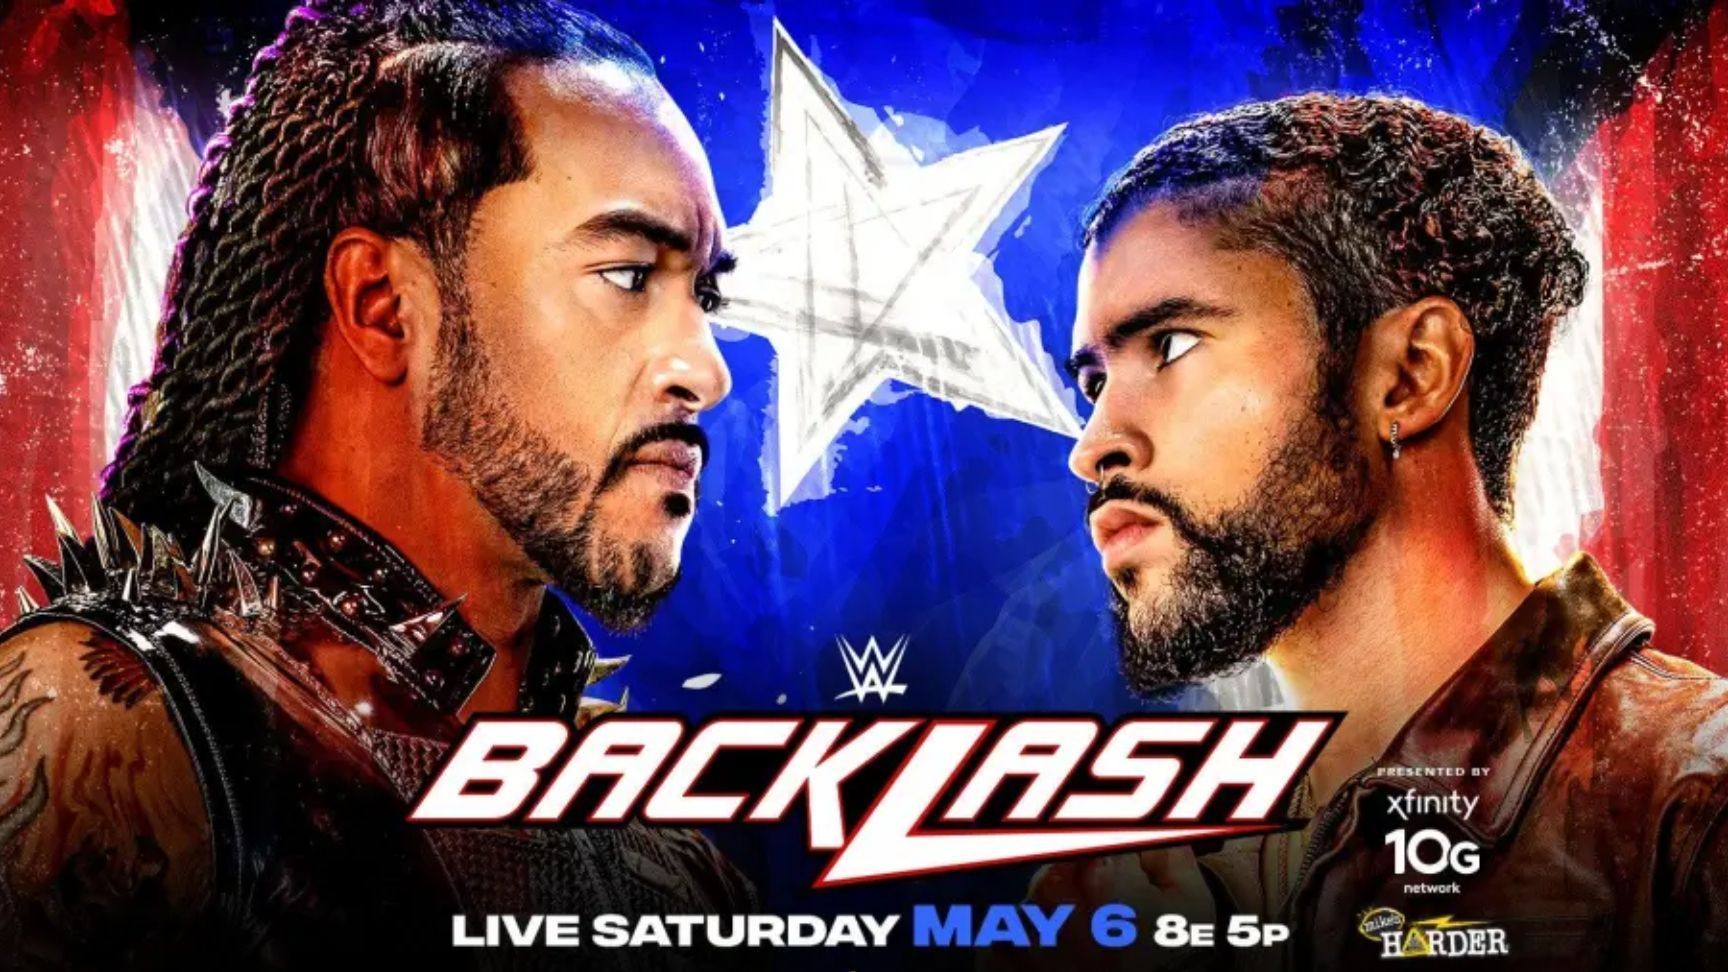 Backlash took place this past Saturday in Puerto Rico.